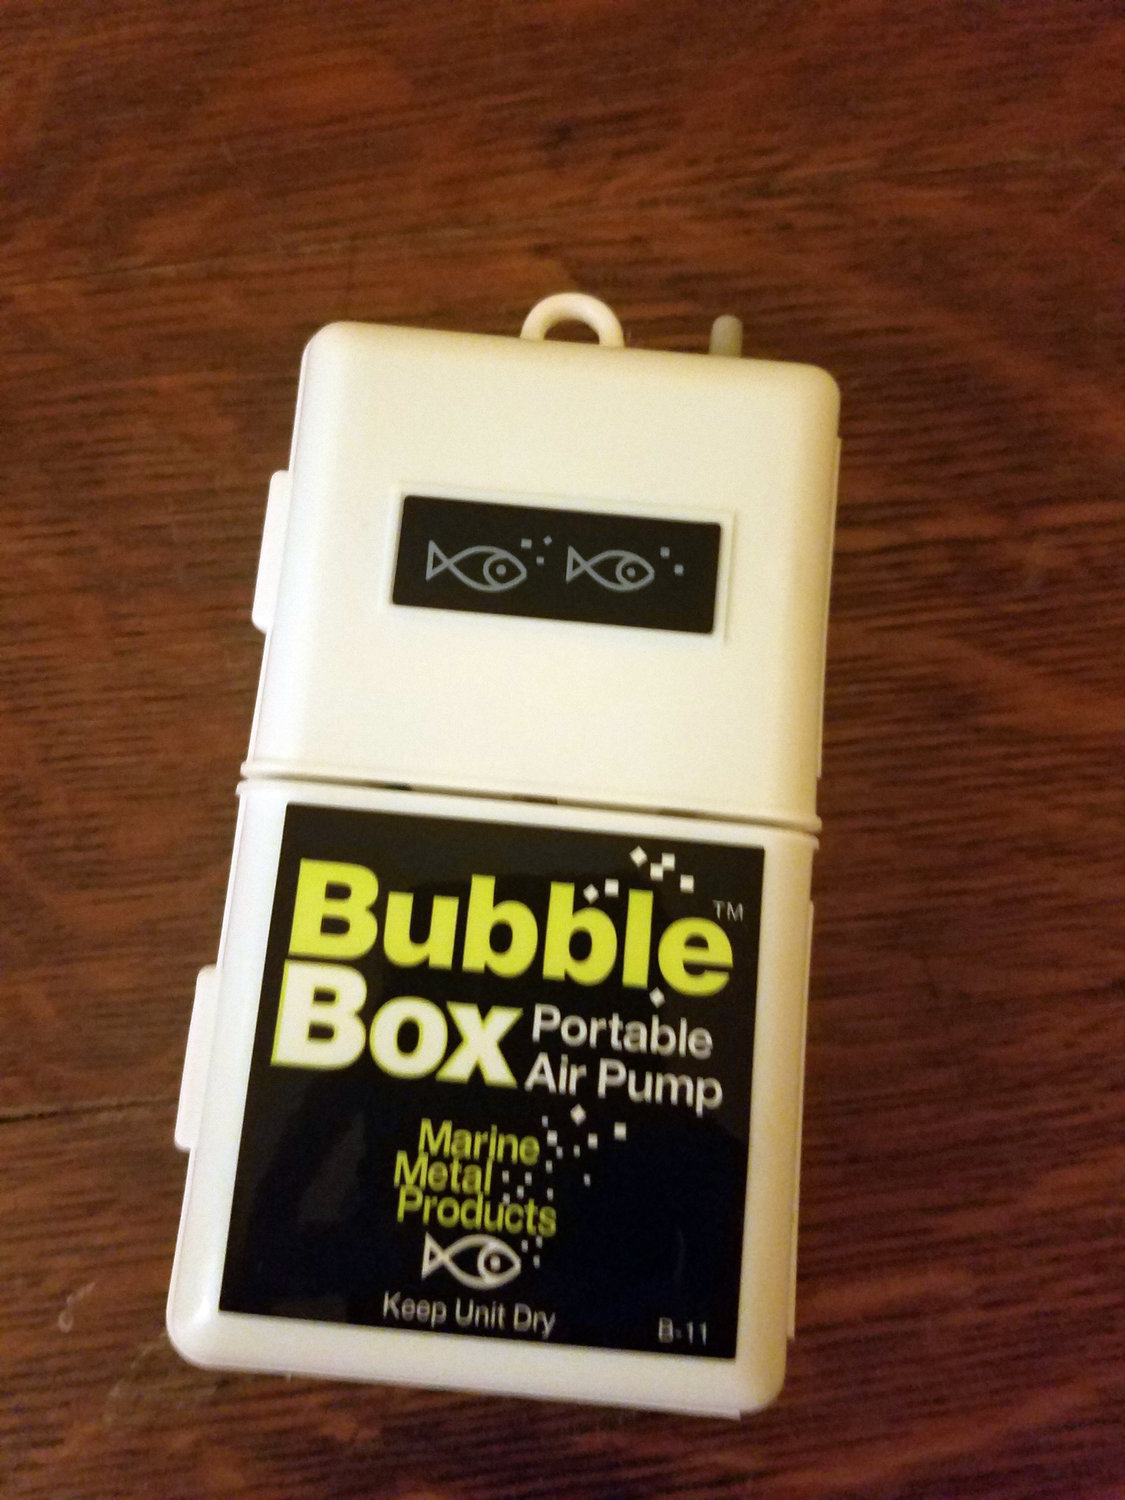 If you fish with live bait, the Bubble Box may be an aeration solution for you.